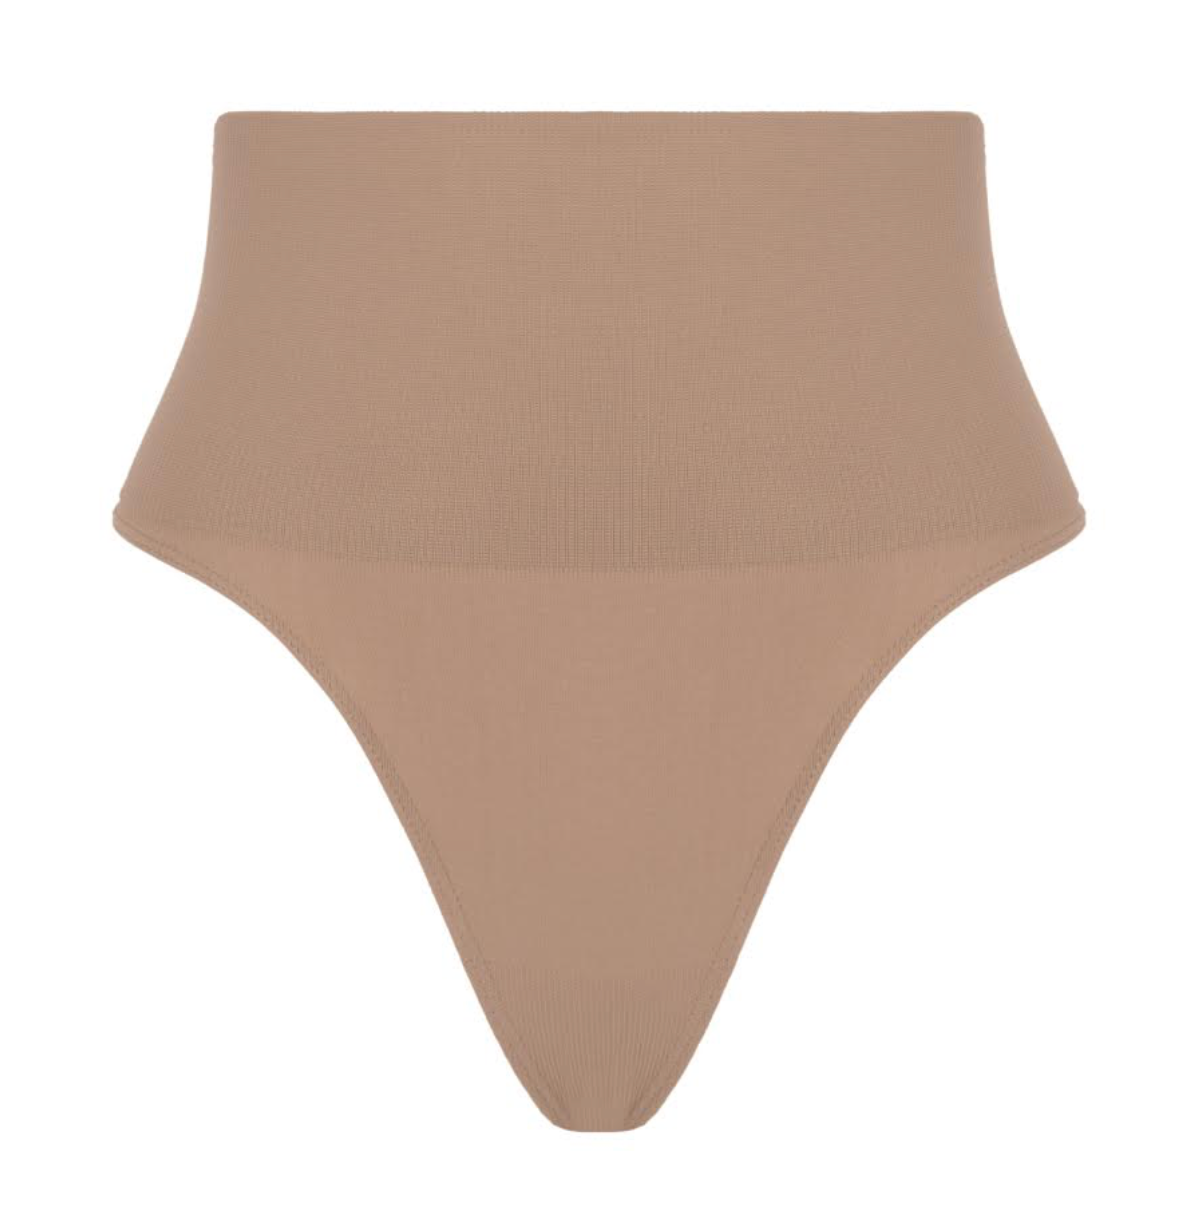 Crop thong shaper style